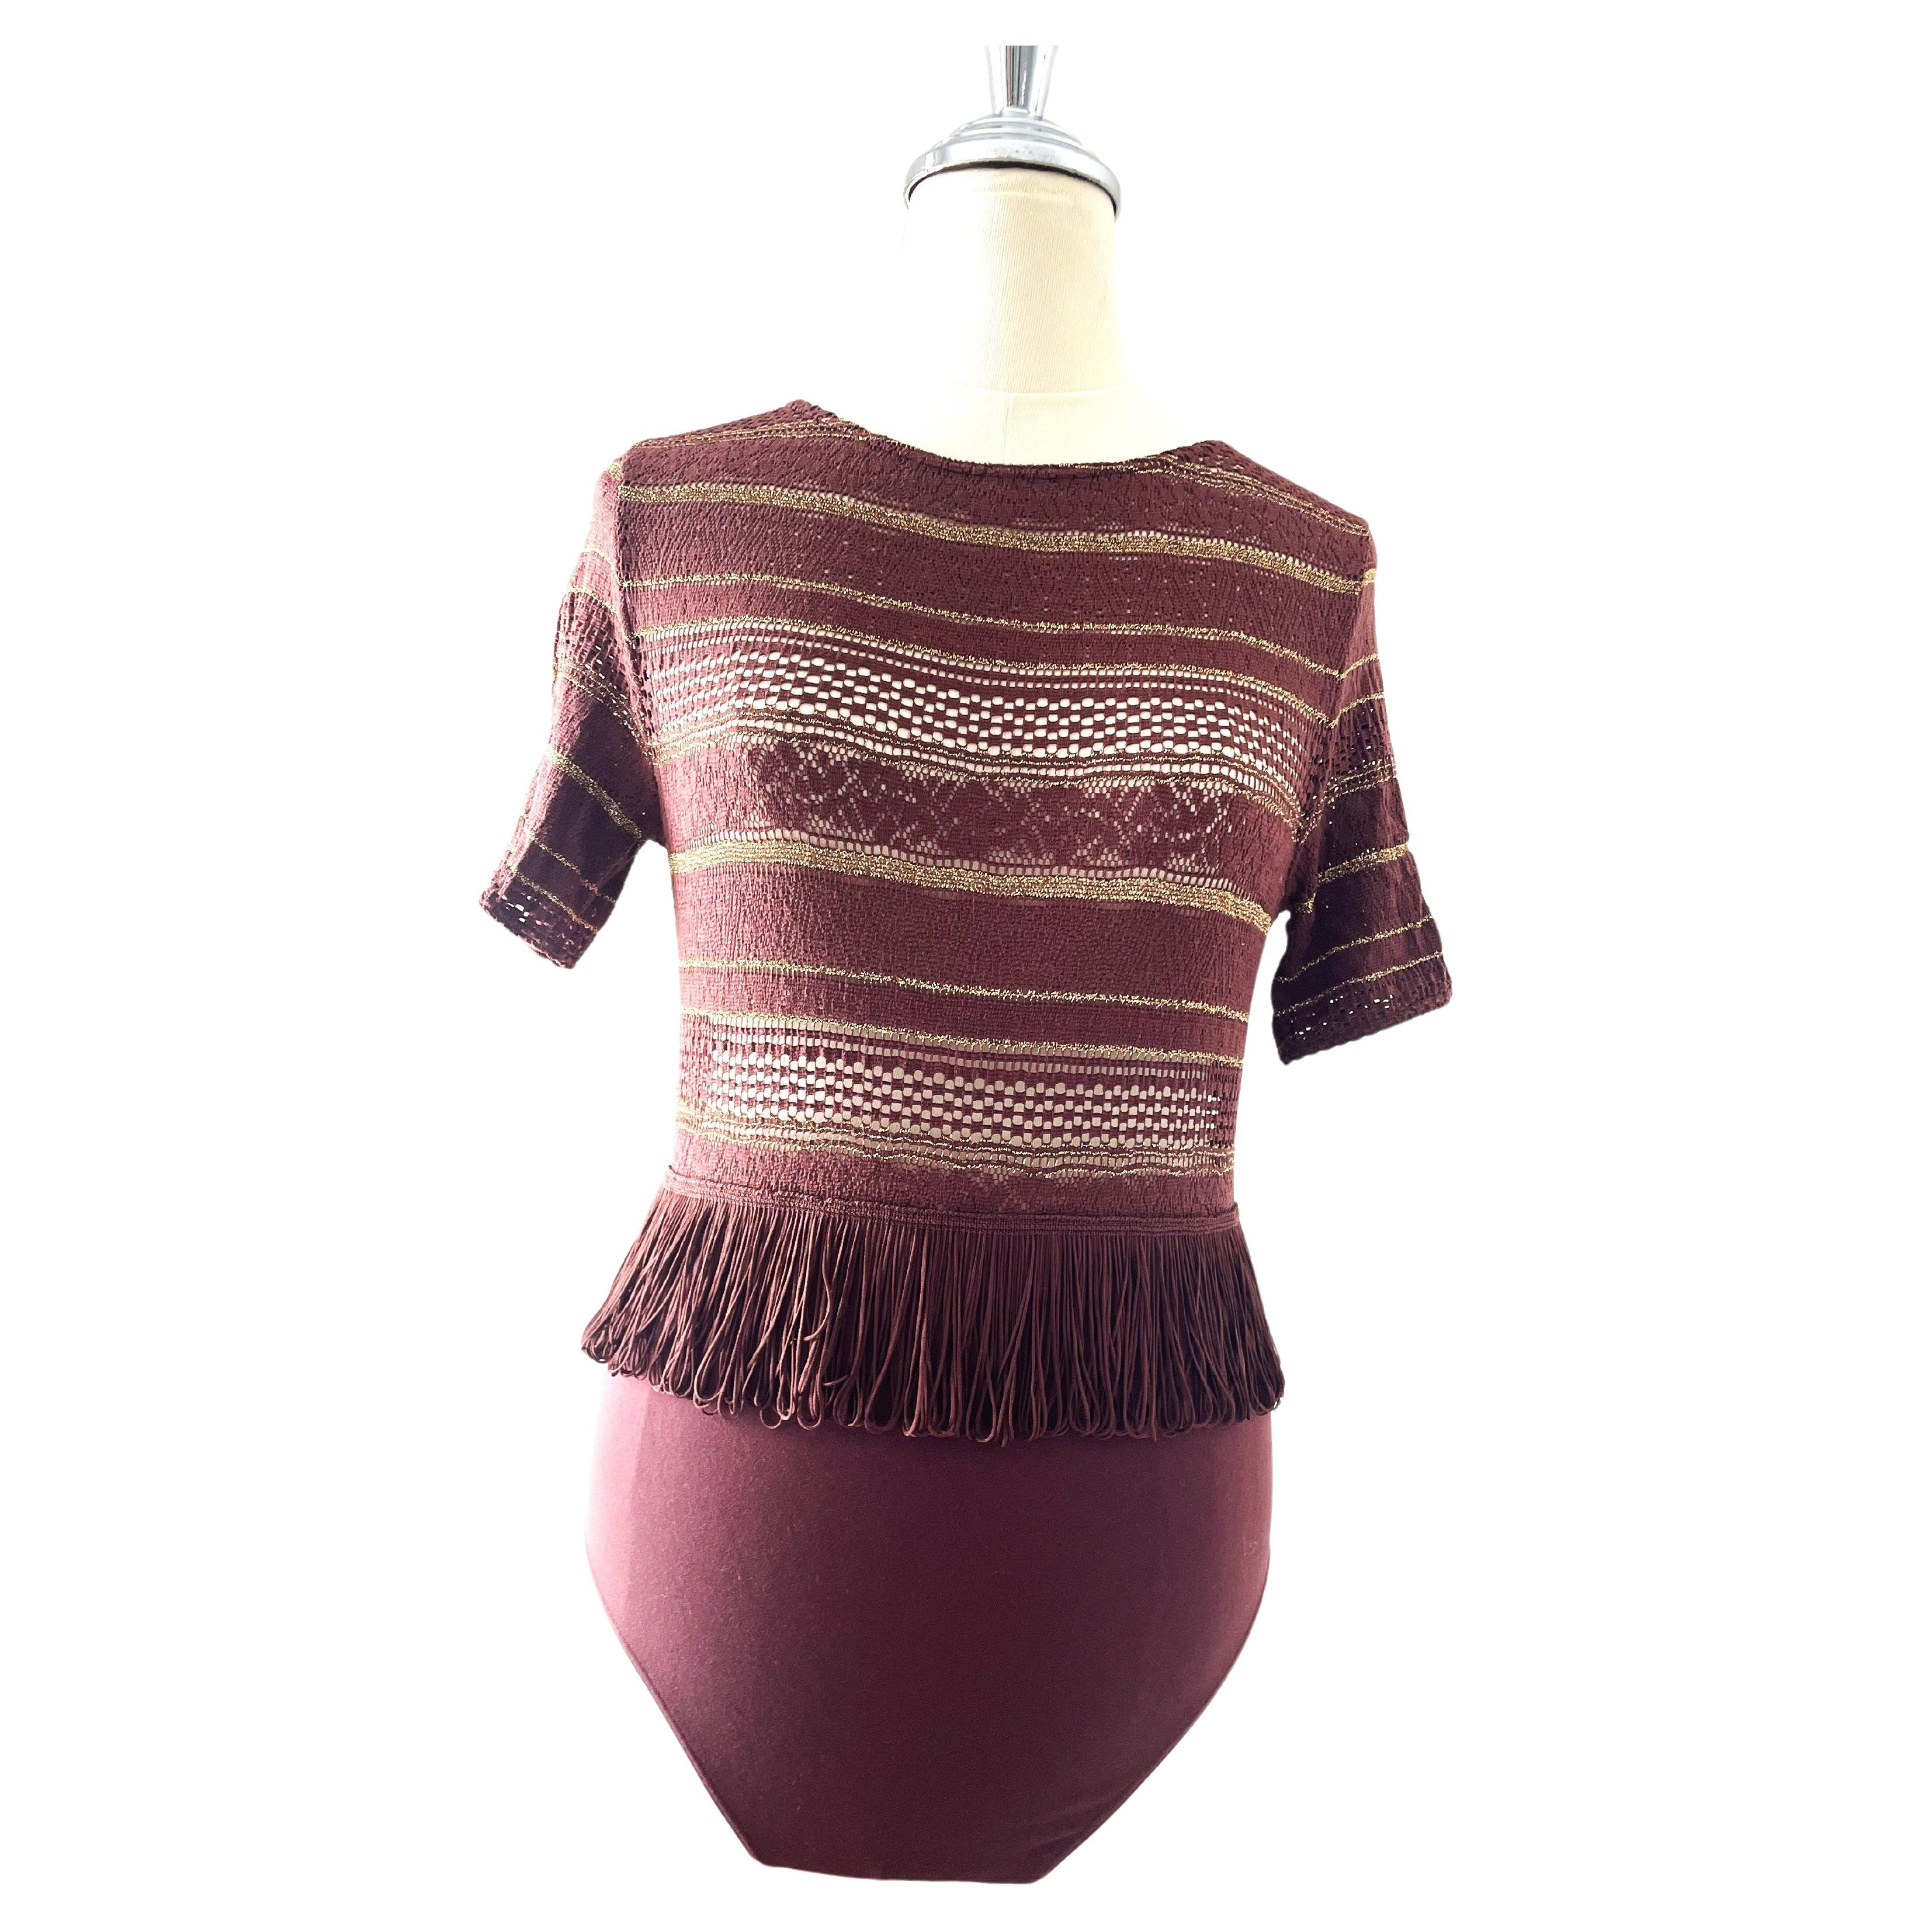 Wolford Bodysuit Brown Knitted Fringes 90s